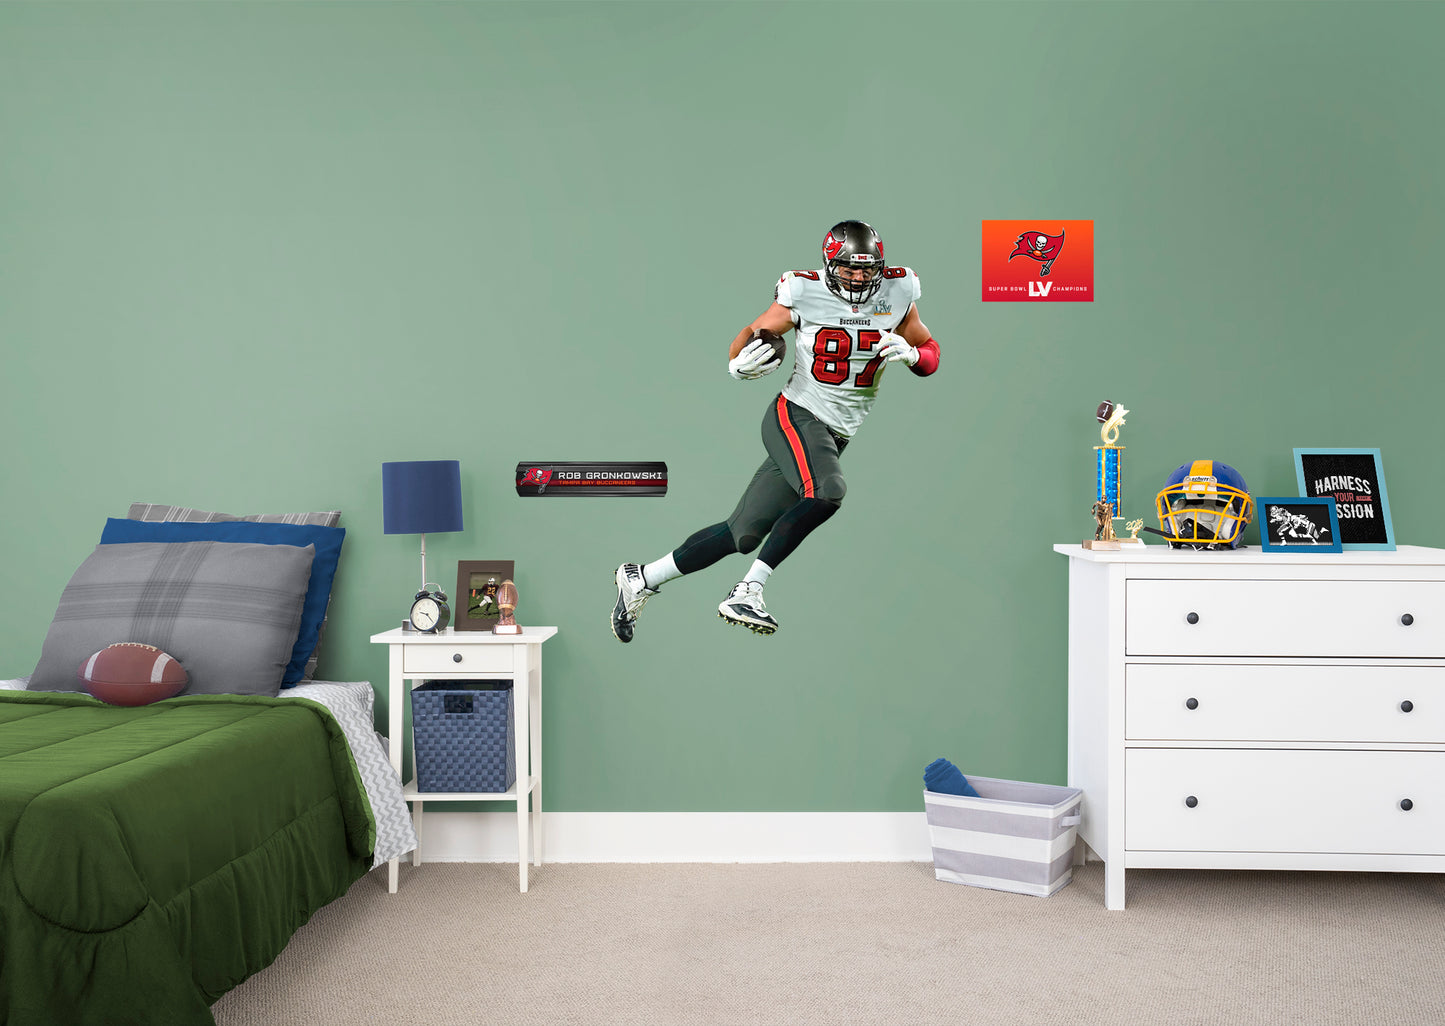 Giant Athlete + 2 Decals (39.5"W x 51"H) Bring the action of the NFL into your home with a wall decal of Rob Gronkowski! High quality, durable, and tear resistant, you'll be able to stick and move it as many times as you want to create the ultimate football experience in any room!